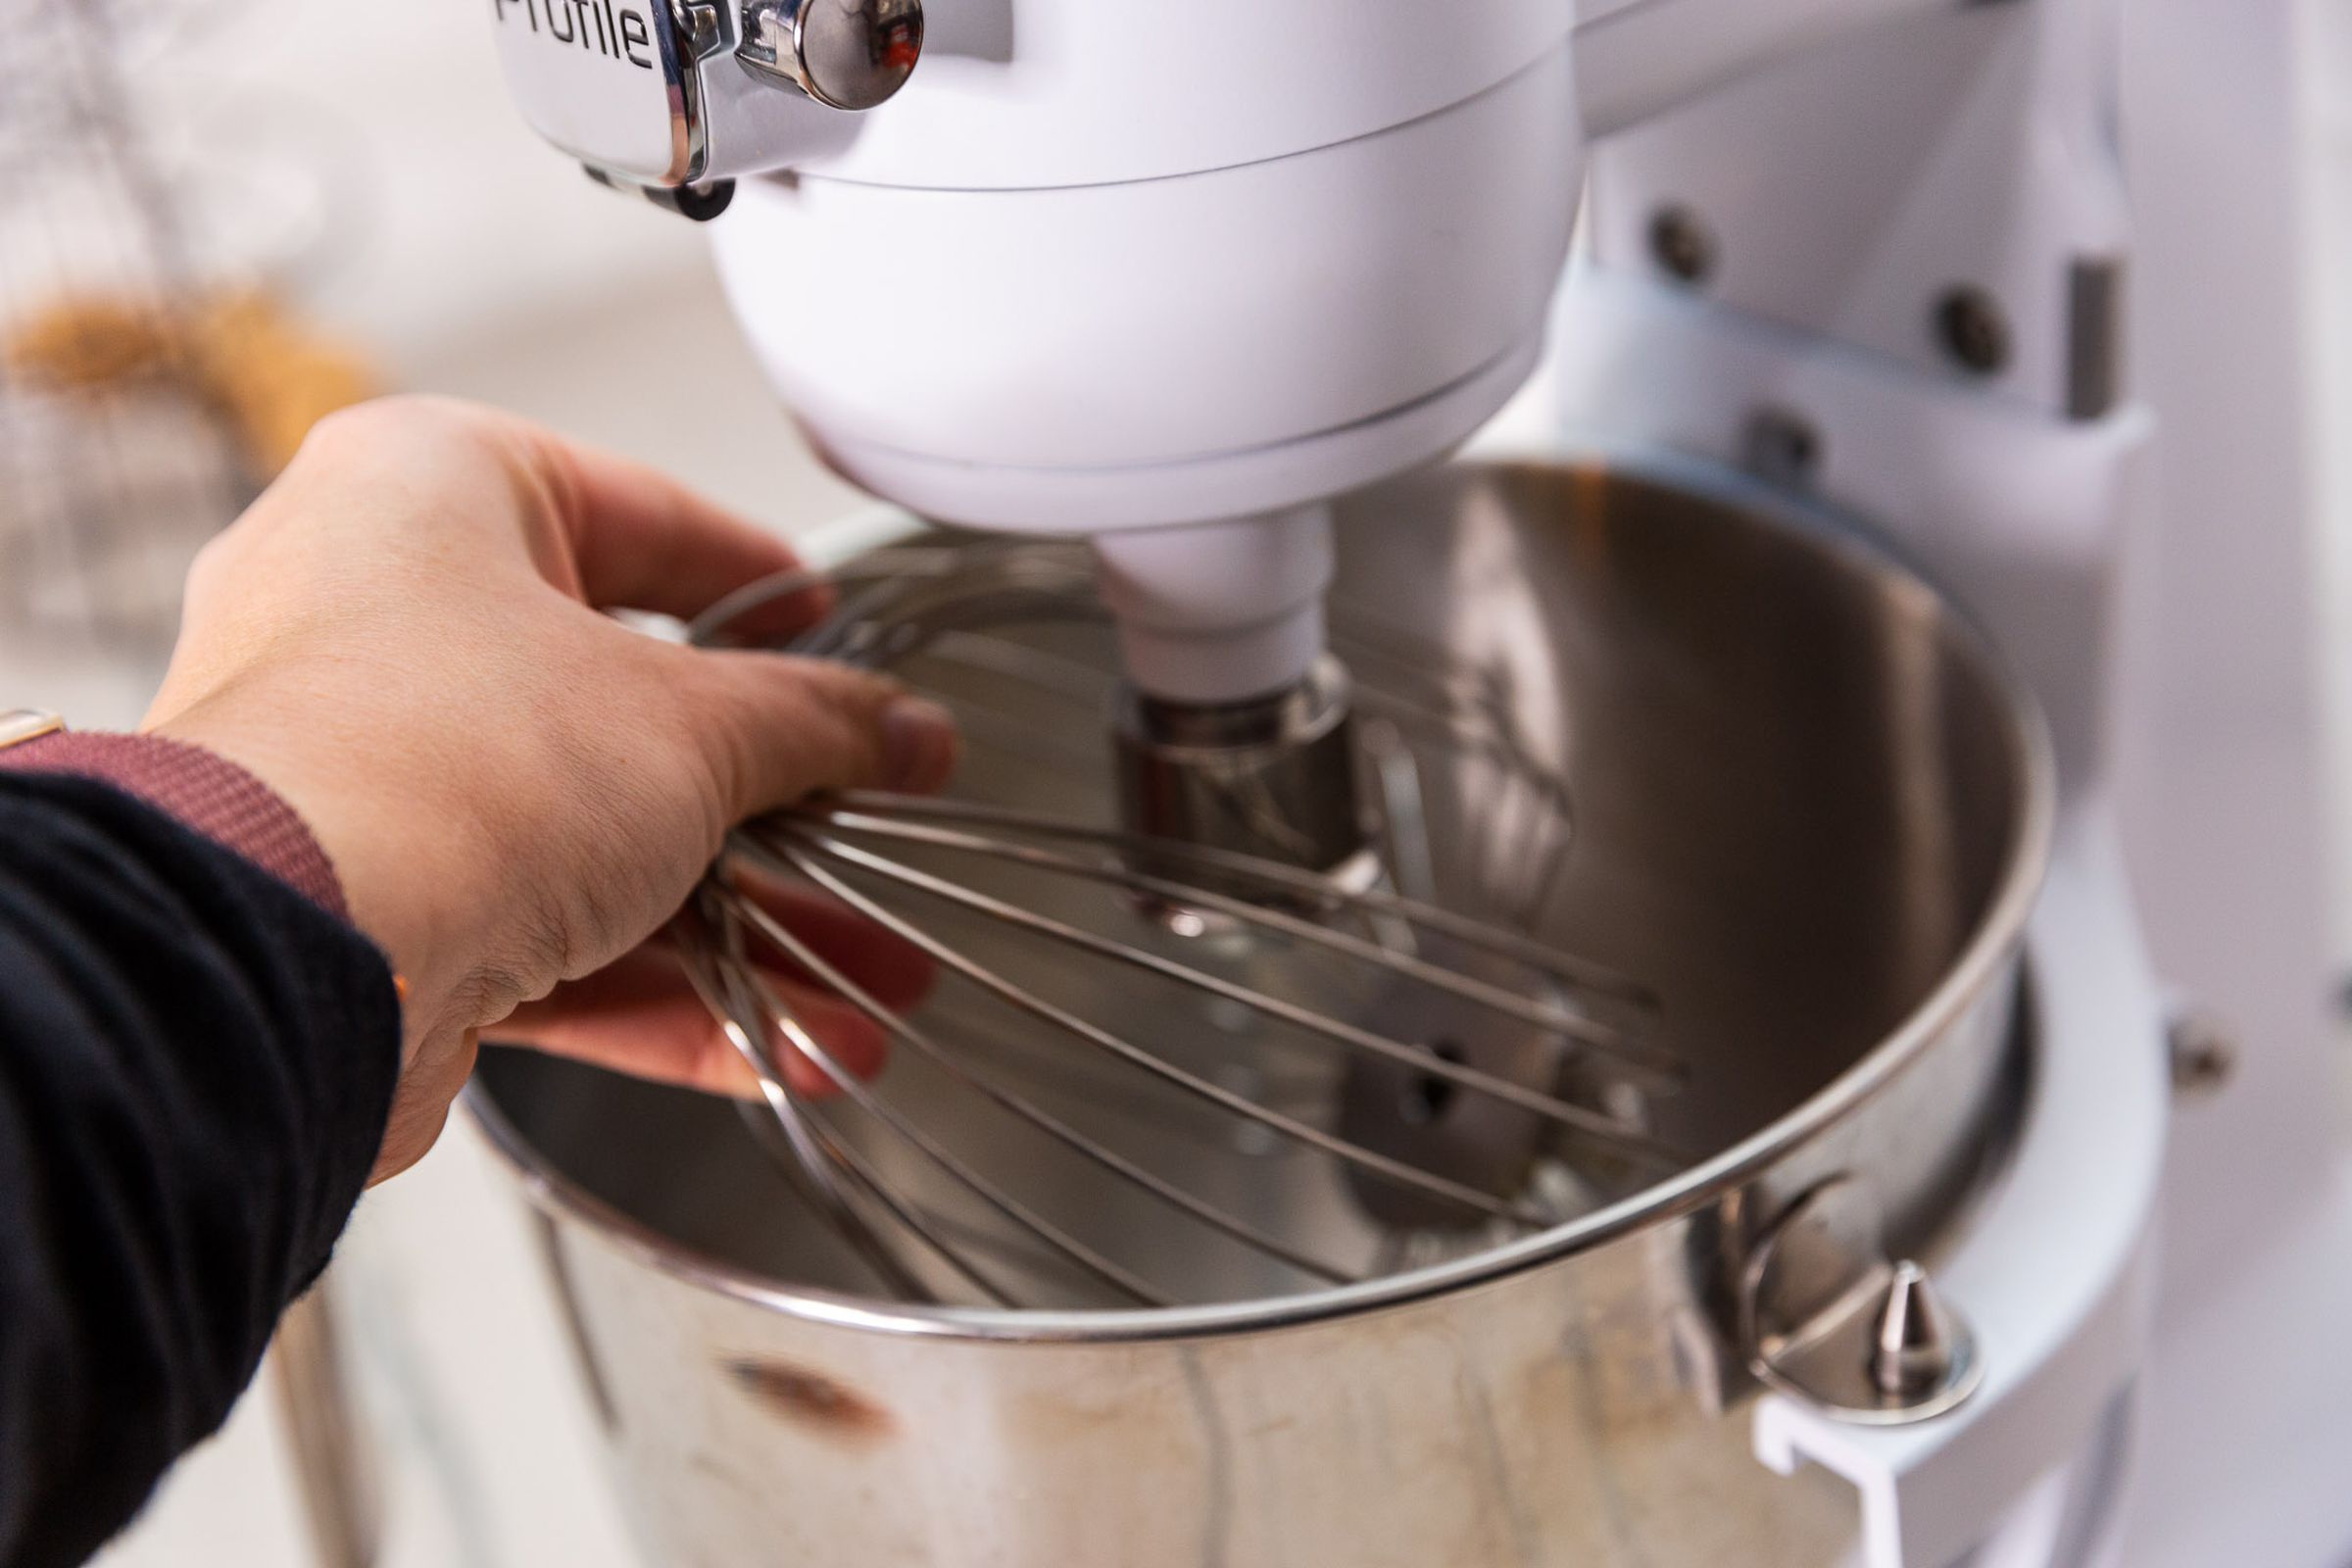 The mixer is not a tilt head, so the whisk attachment is designed with a cutout so that it can fit into the bowl.